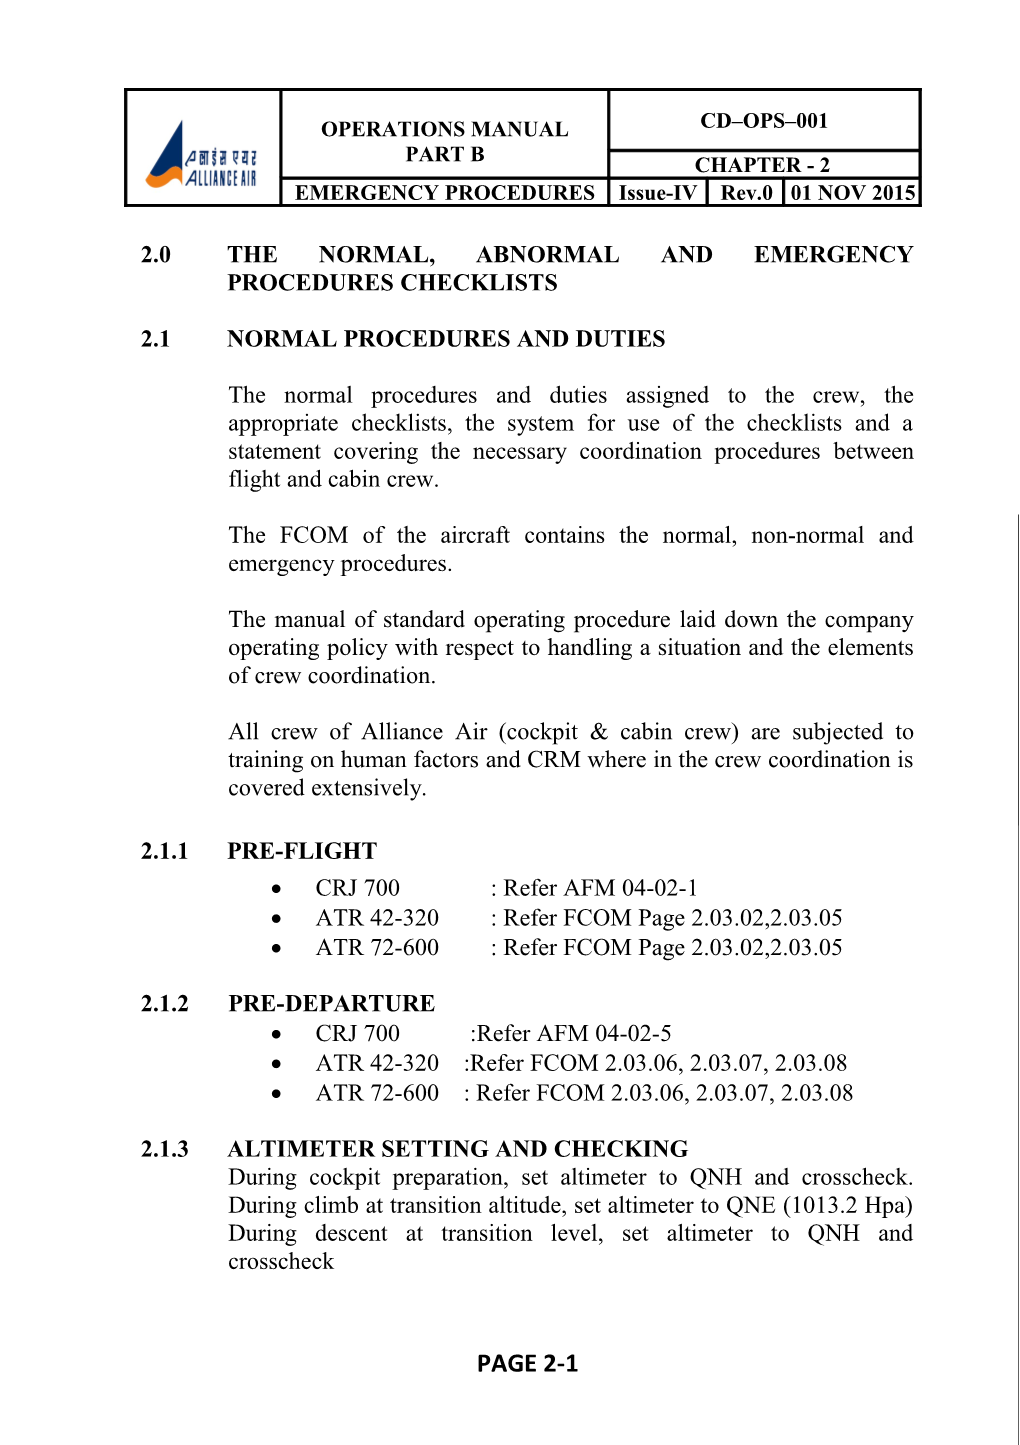 2.0The Normal, Abnormal and Emergency Procedures Checklists